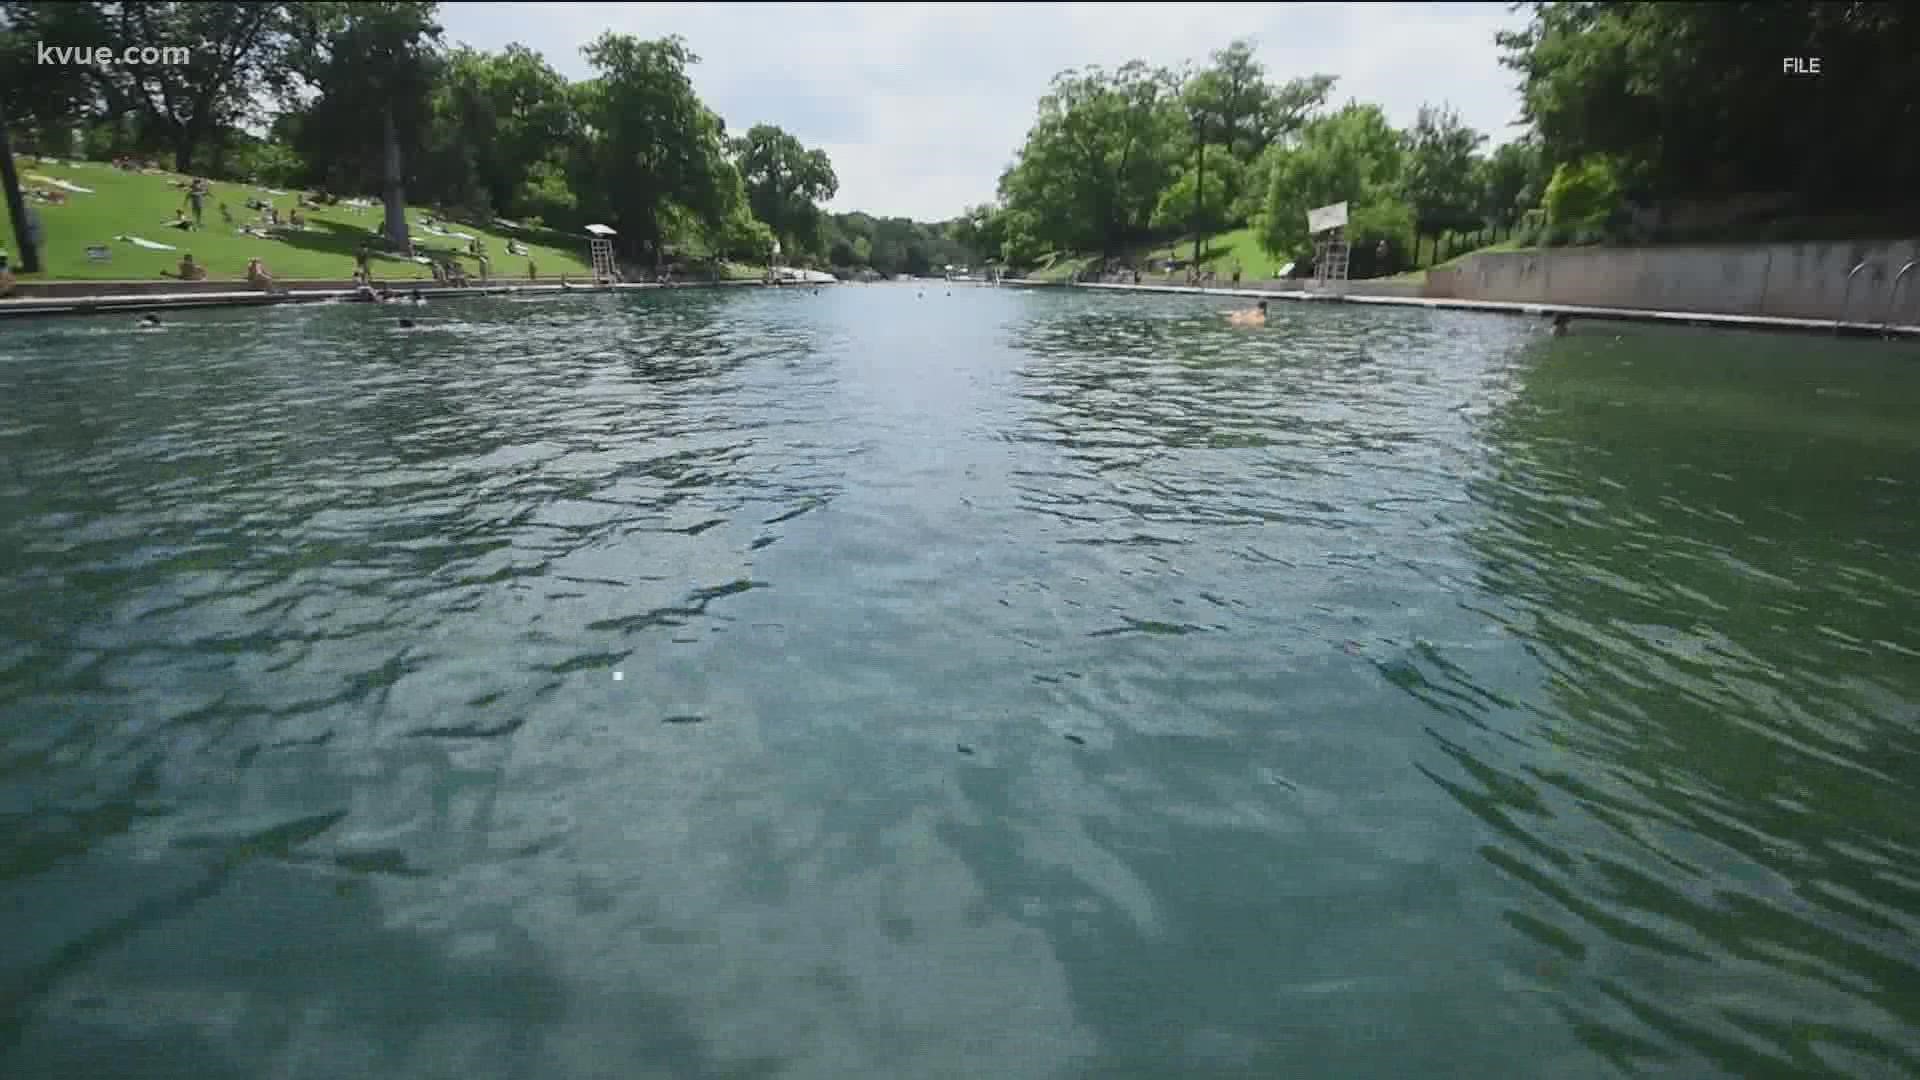 Barton Springs Pool will resume its normal Monday hours, starting one week from today.